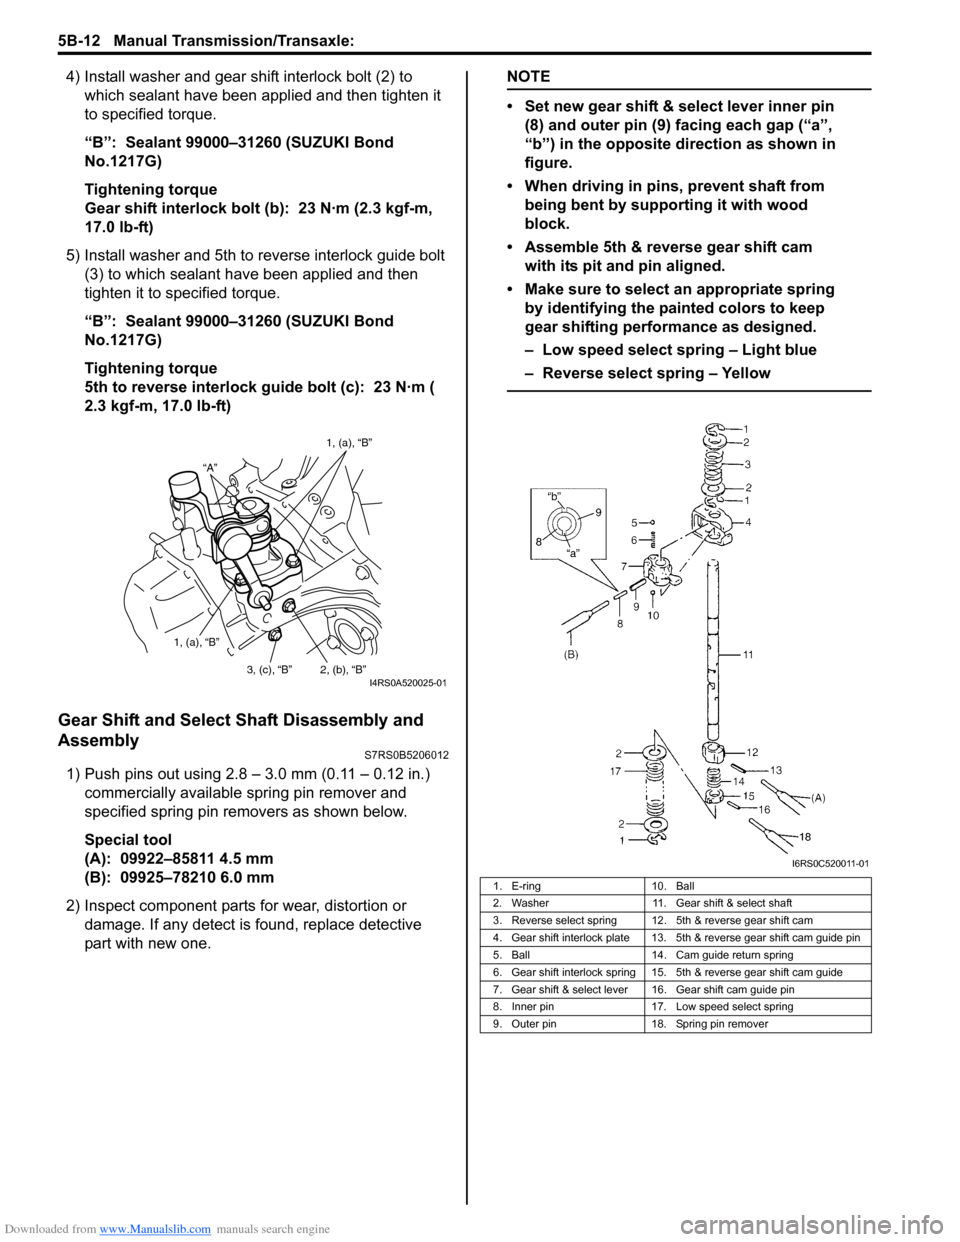 SUZUKI SWIFT 2007 2.G Service Workshop Manual Downloaded from www.Manualslib.com manuals search engine 5B-12 Manual Transmission/Transaxle: 
4) Install washer and gear shift interlock bolt (2) to which sealant have been app lied and then tighten 